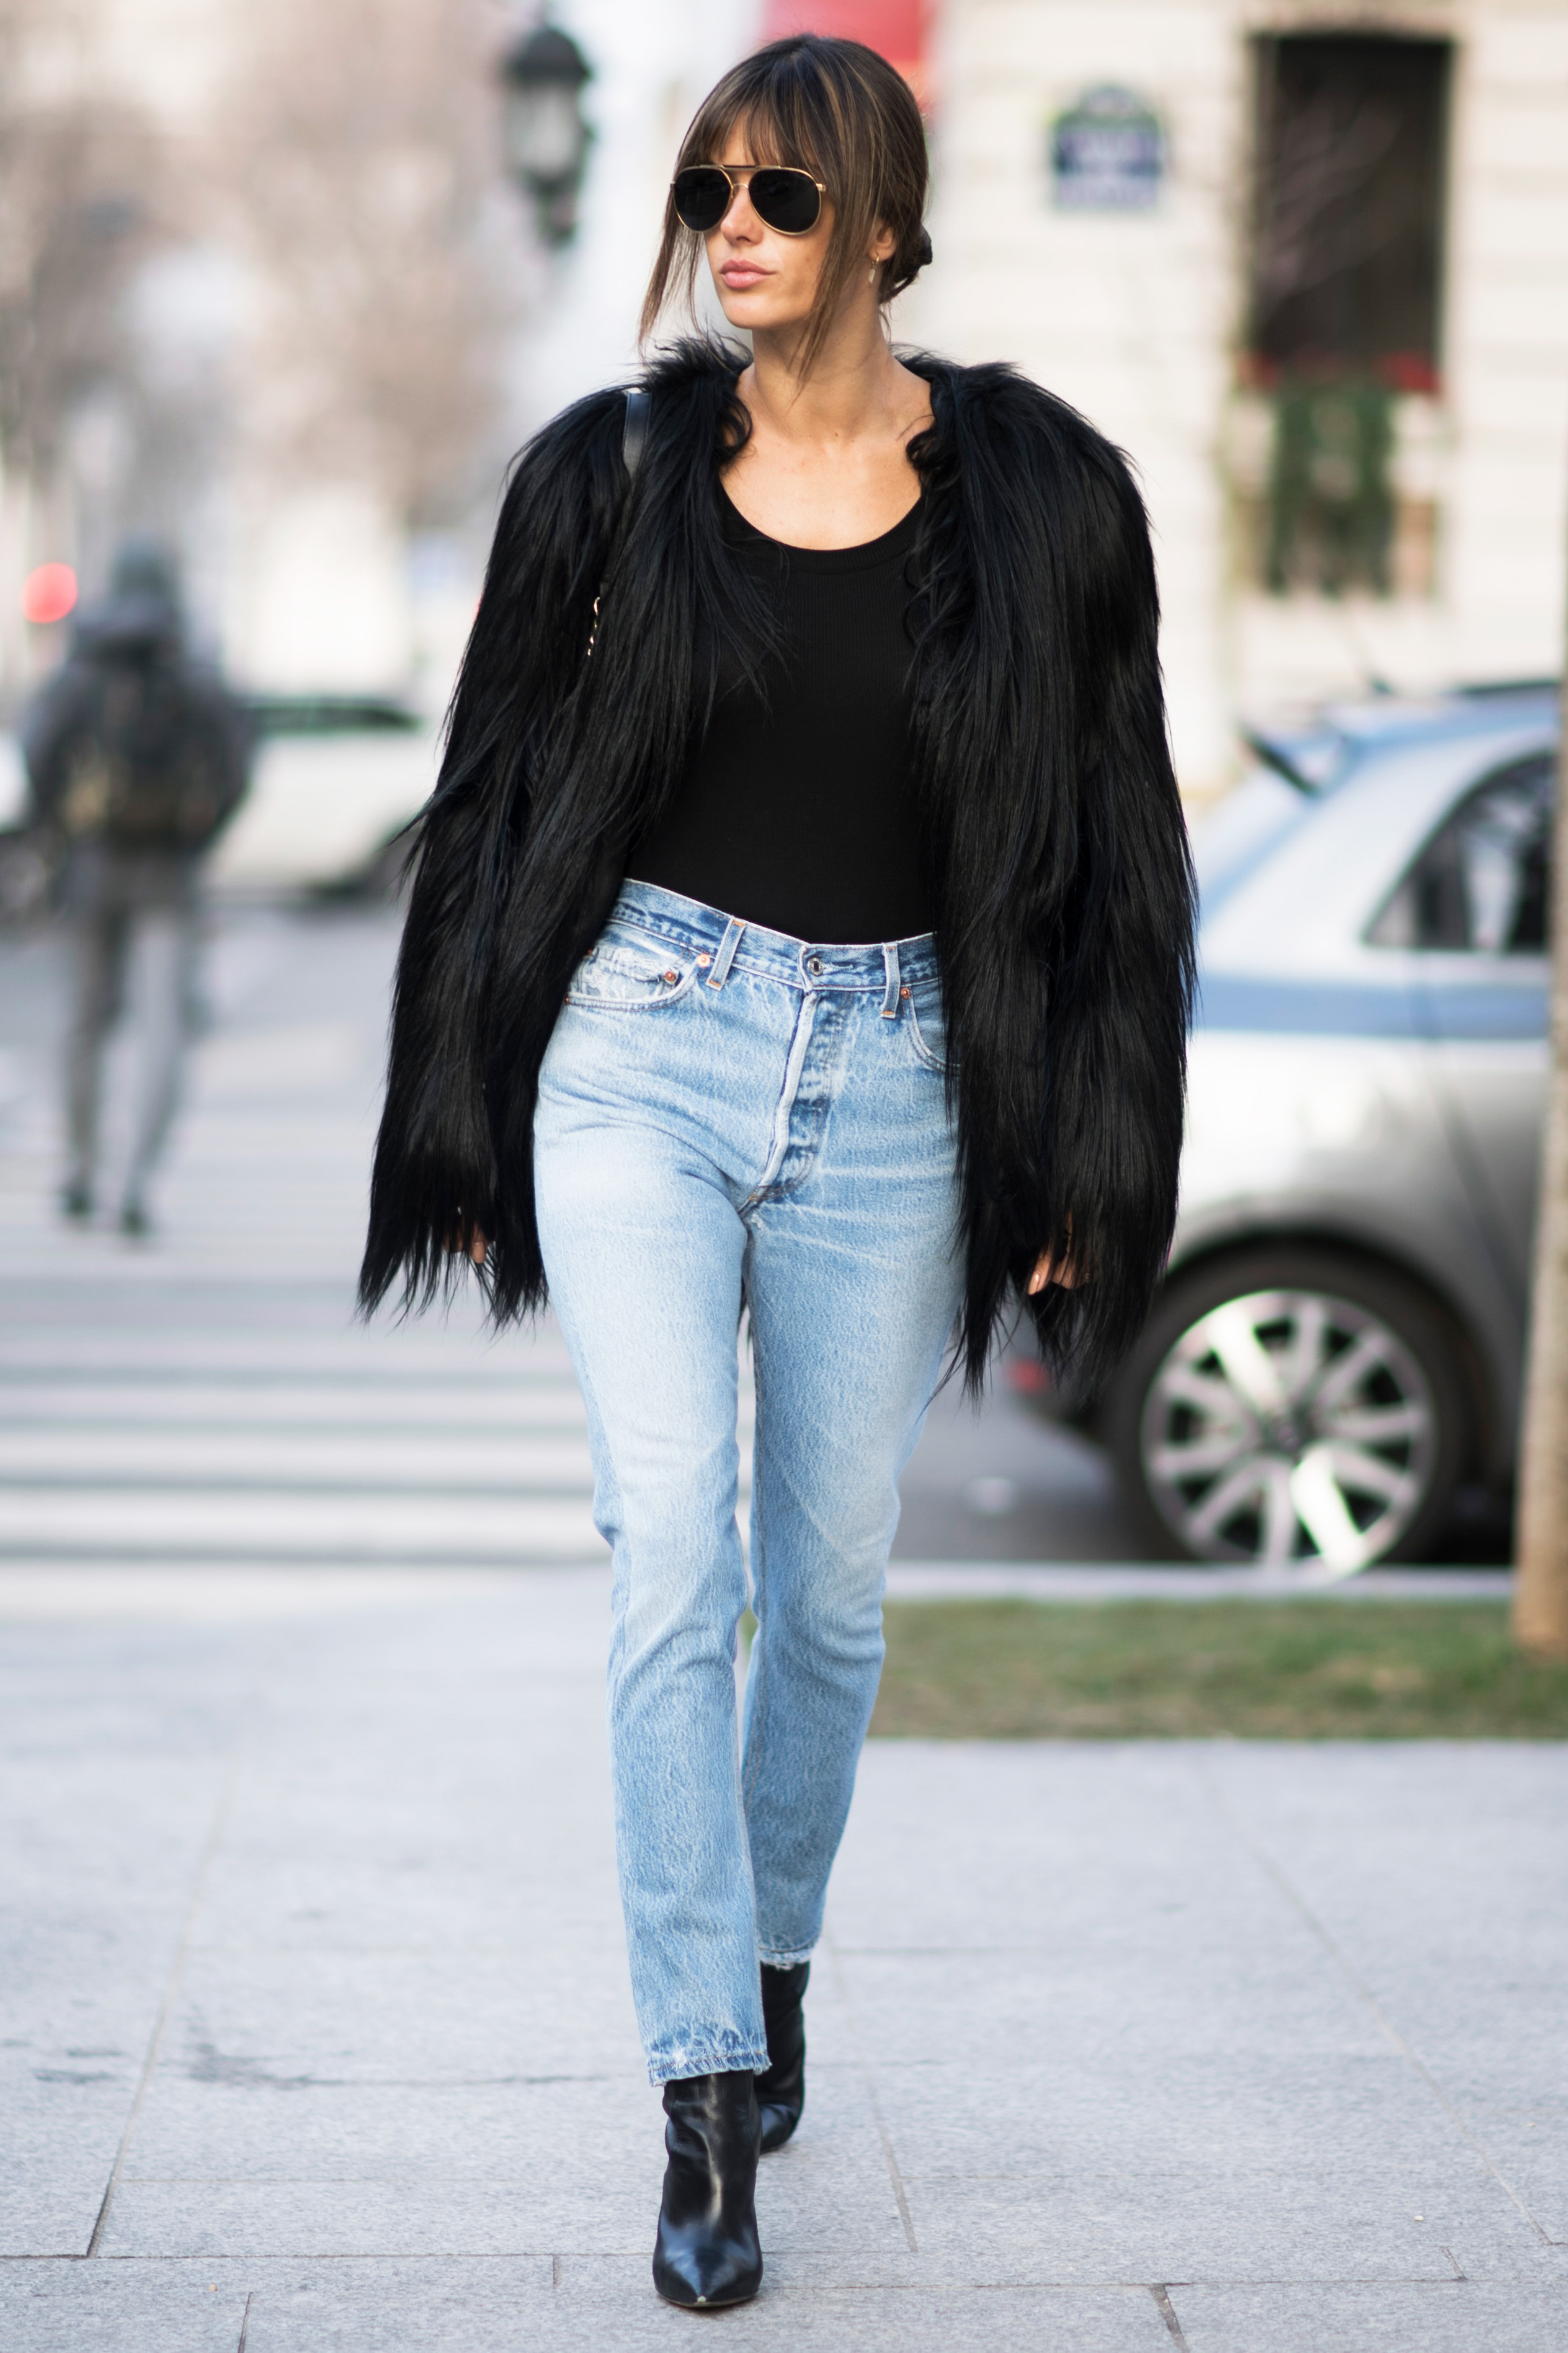 The Winter Outfit Formula for Girls Who Love to Wear Black | Who What Wear